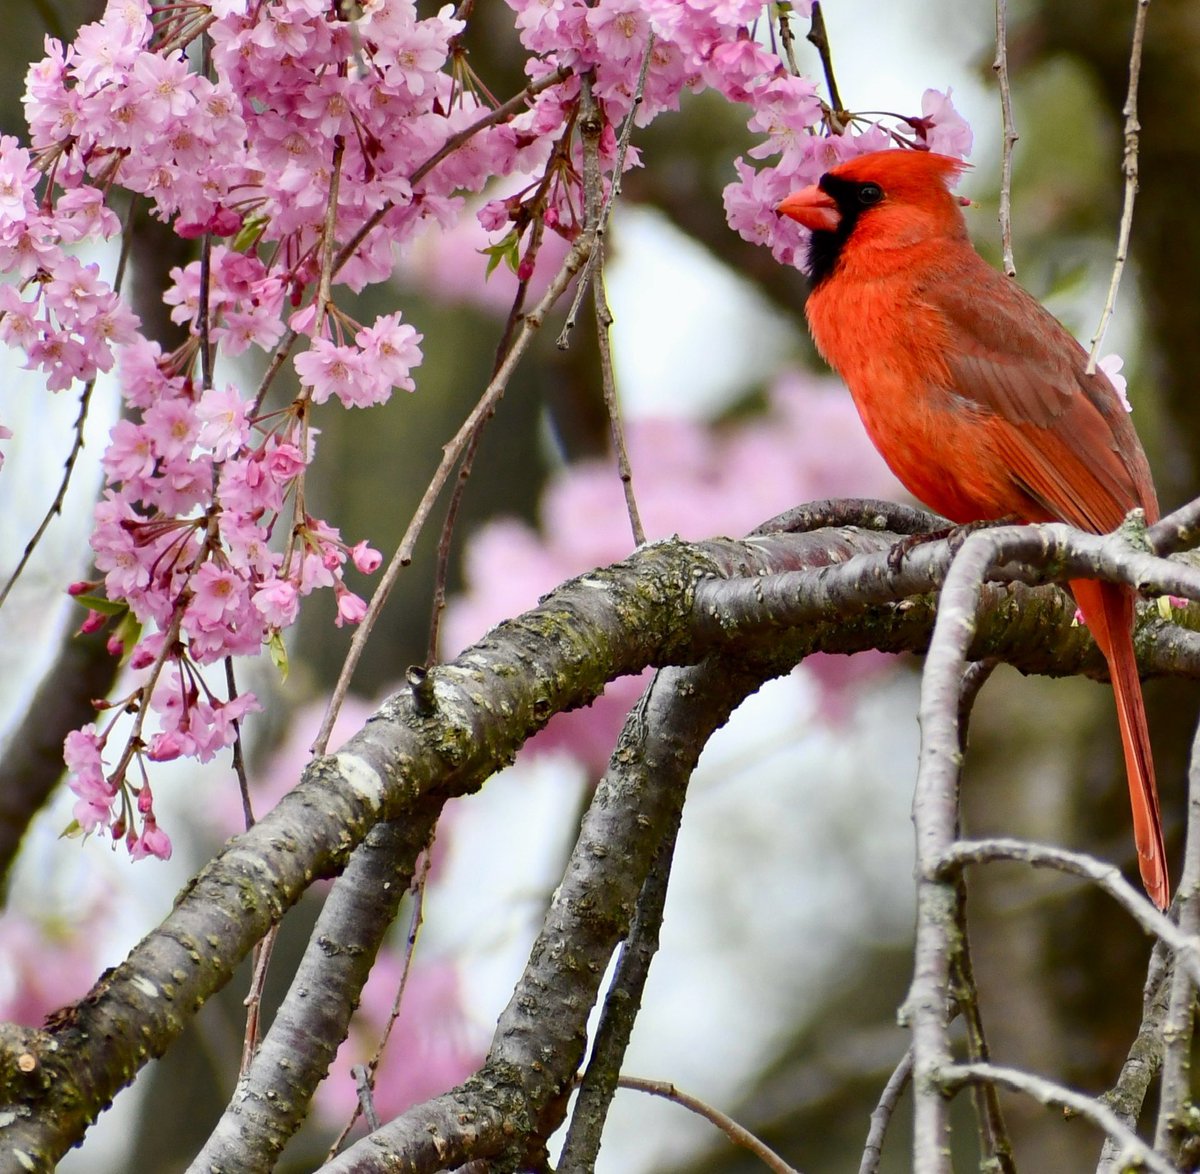 Male Cardinal in the weeping cherry puffed up before singing a short tune
#birdphotography #Cardinal